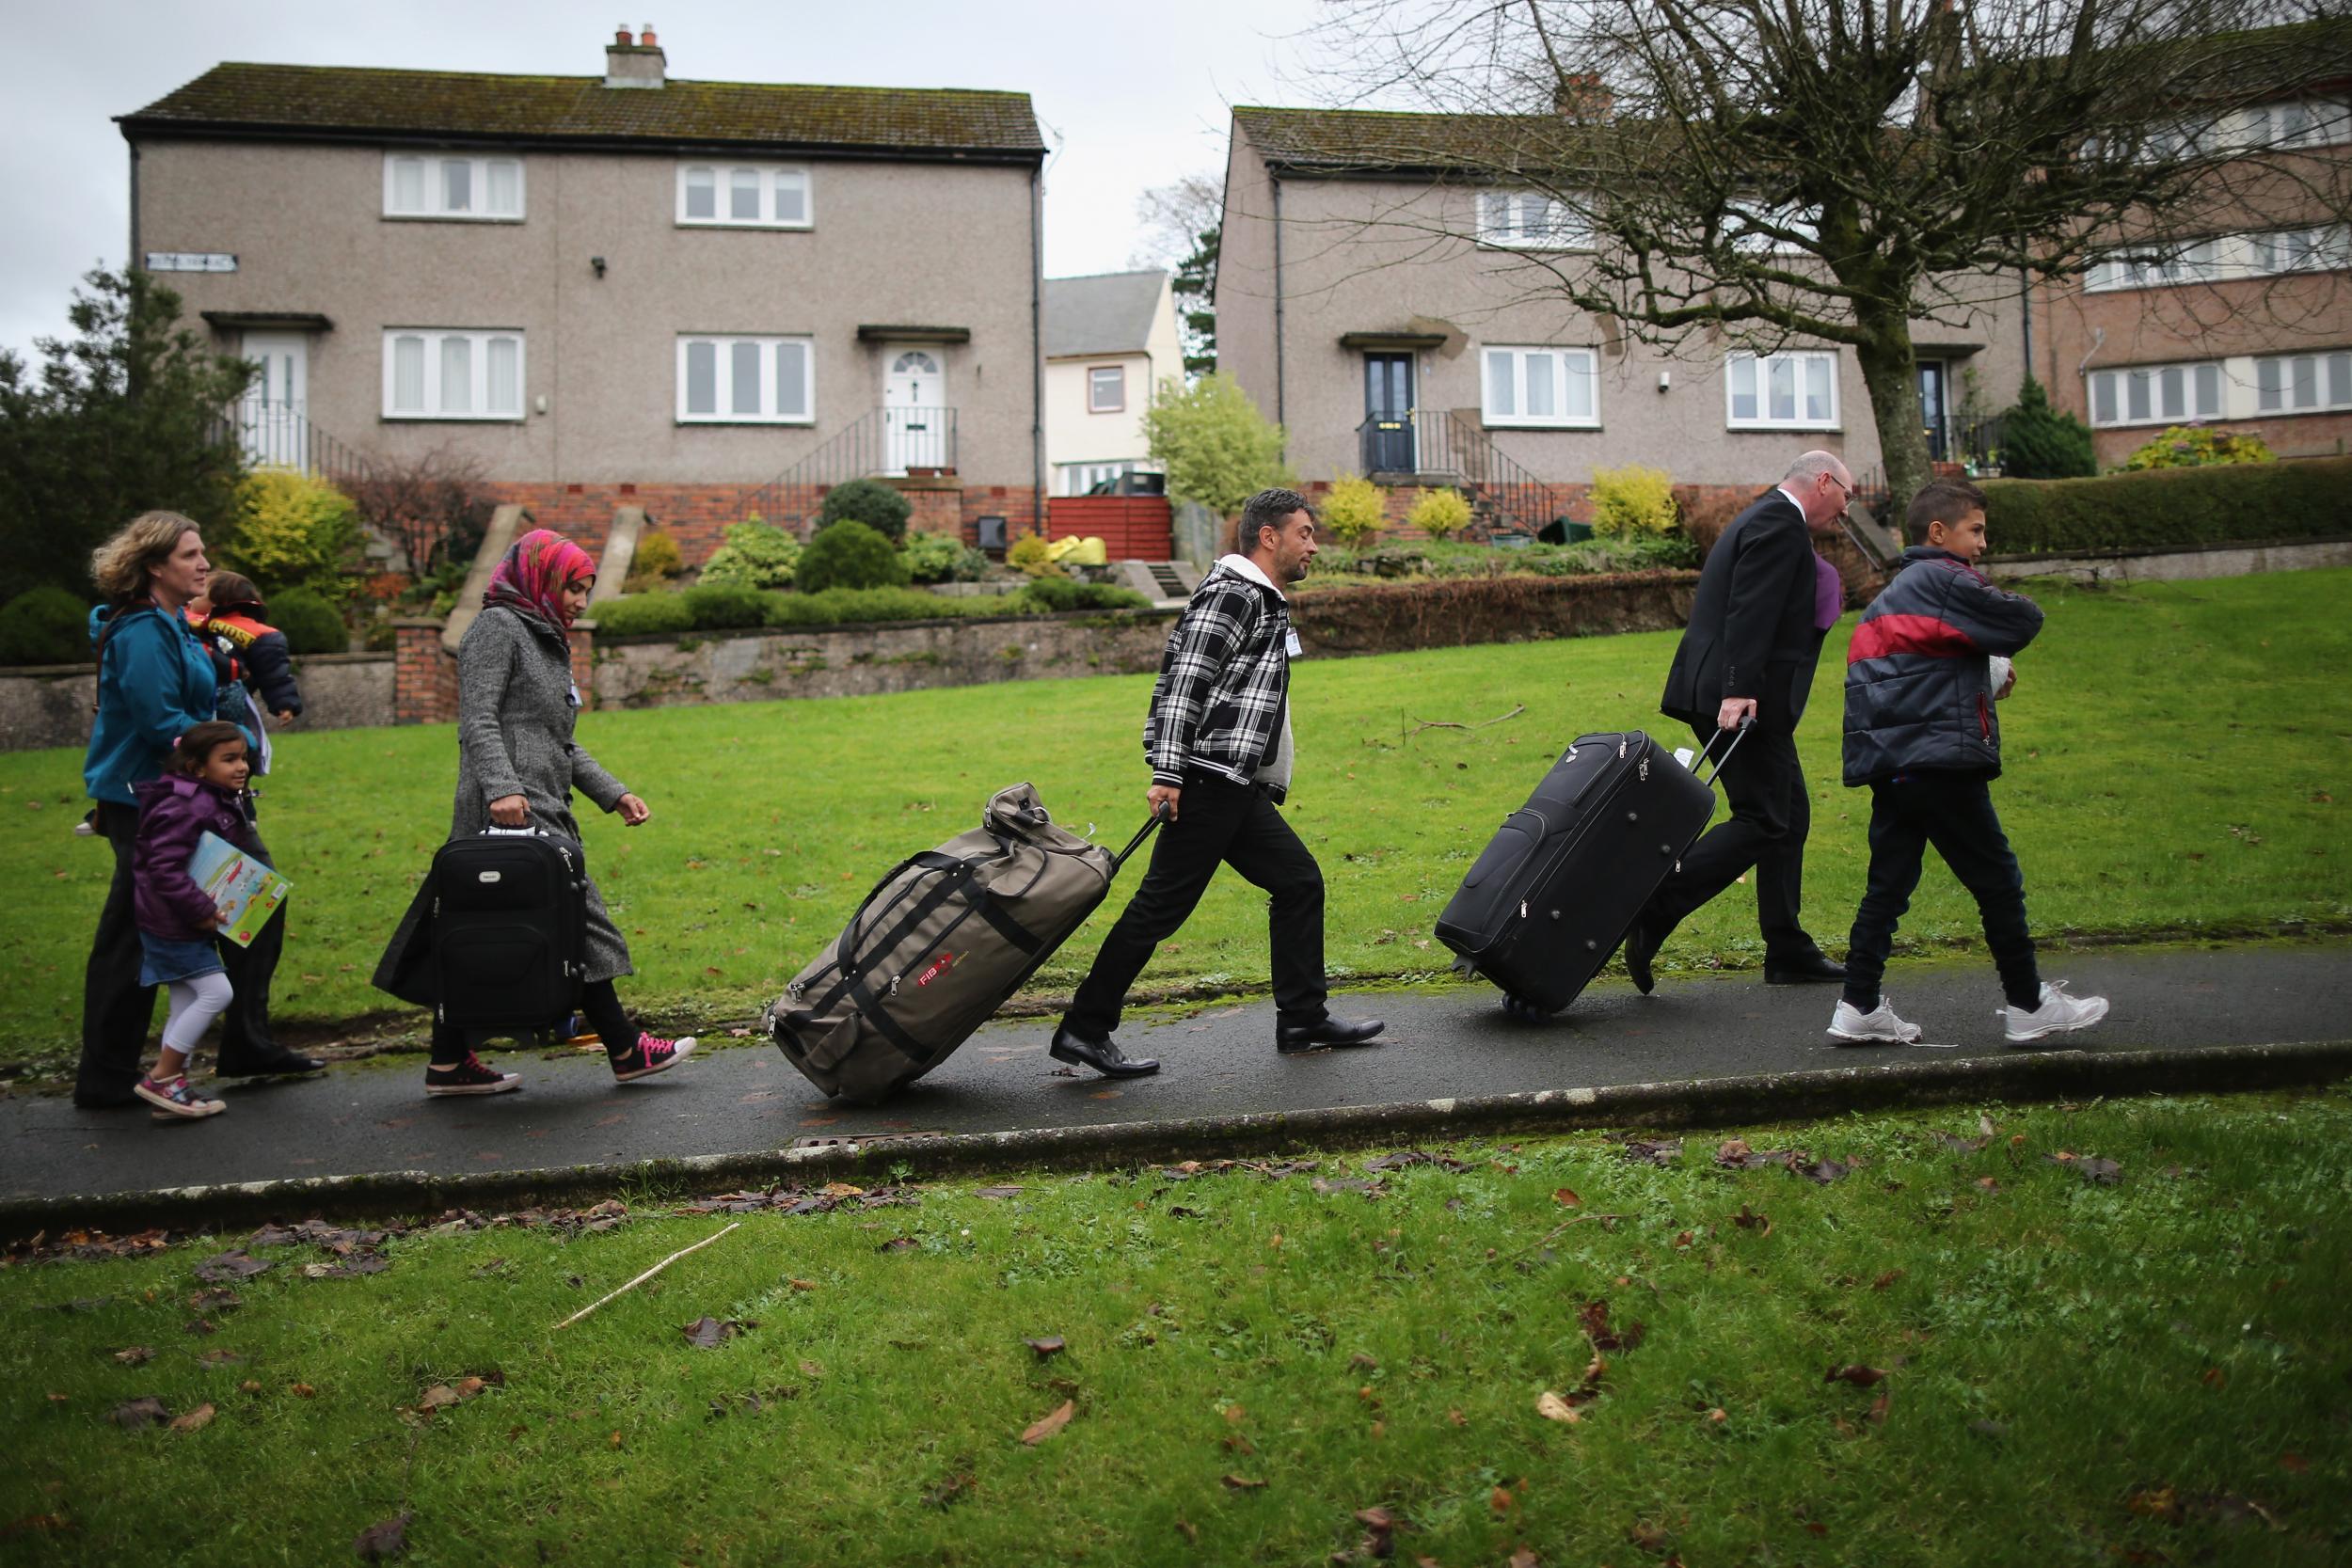 Refugees have said they are grateful for the ‘genuine welcome’ they have received in the UK, but the UN highlights a lack of English language provision and support for housing and gaining employment